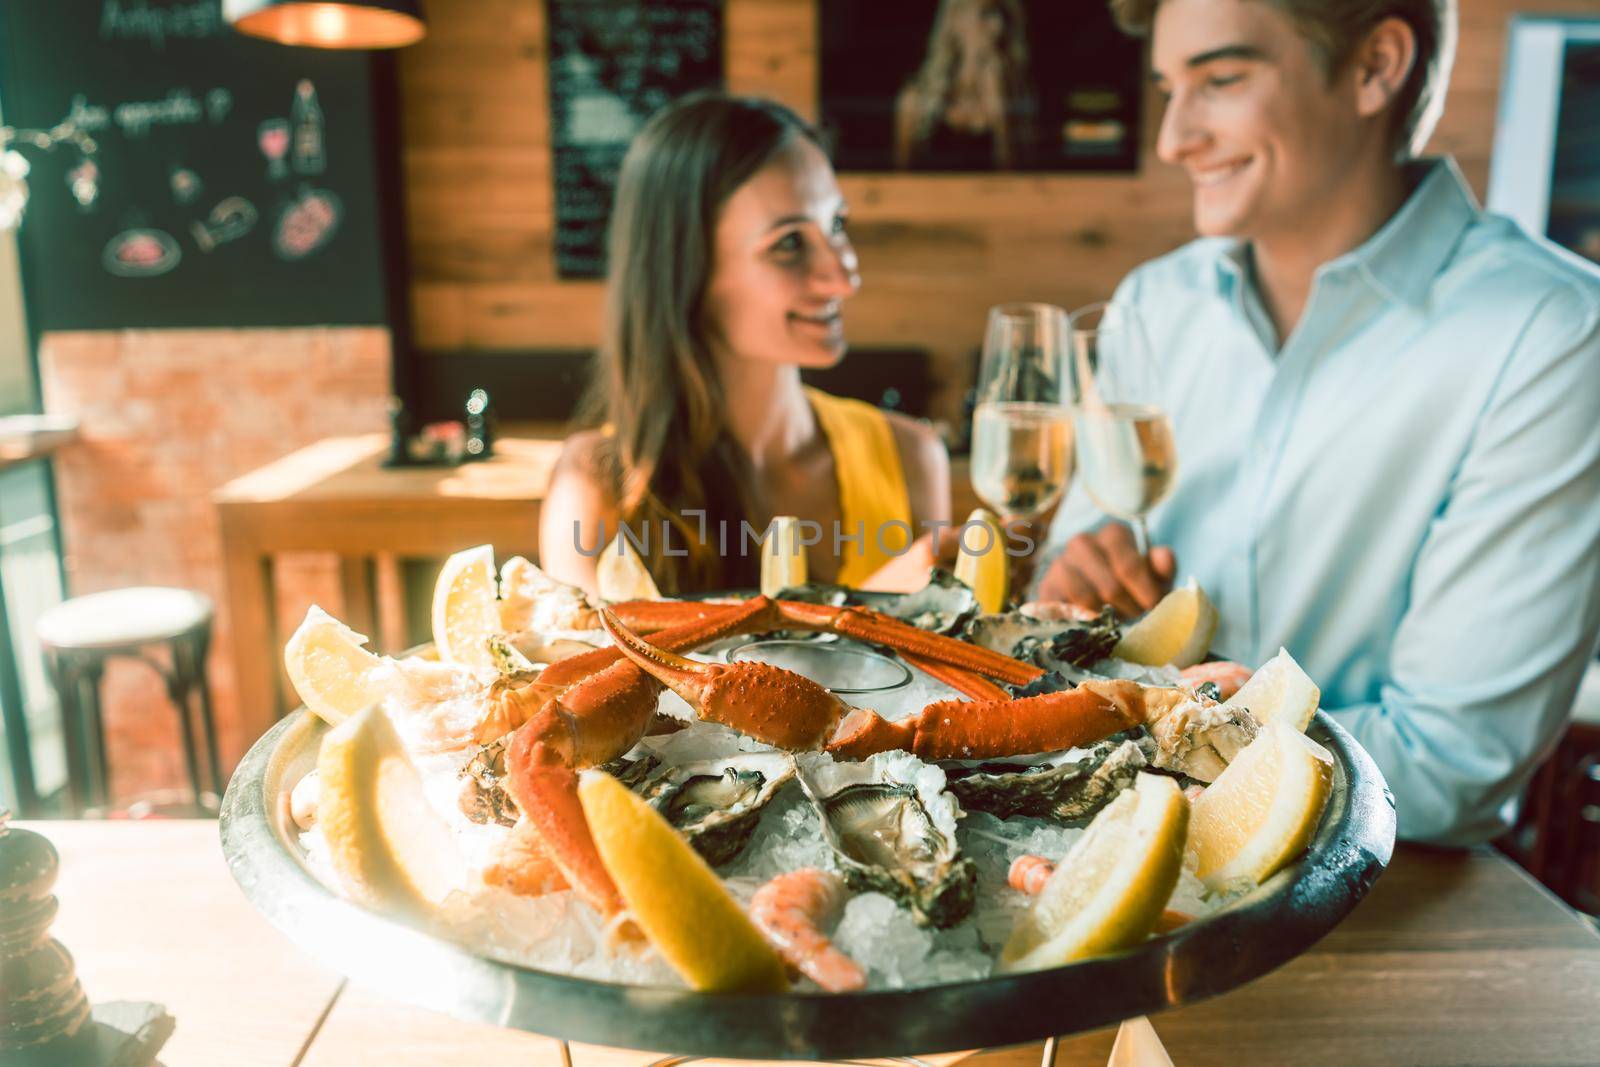 Fresh oysters and crabs served on ice at the table of a romantic young couple by Kzenon